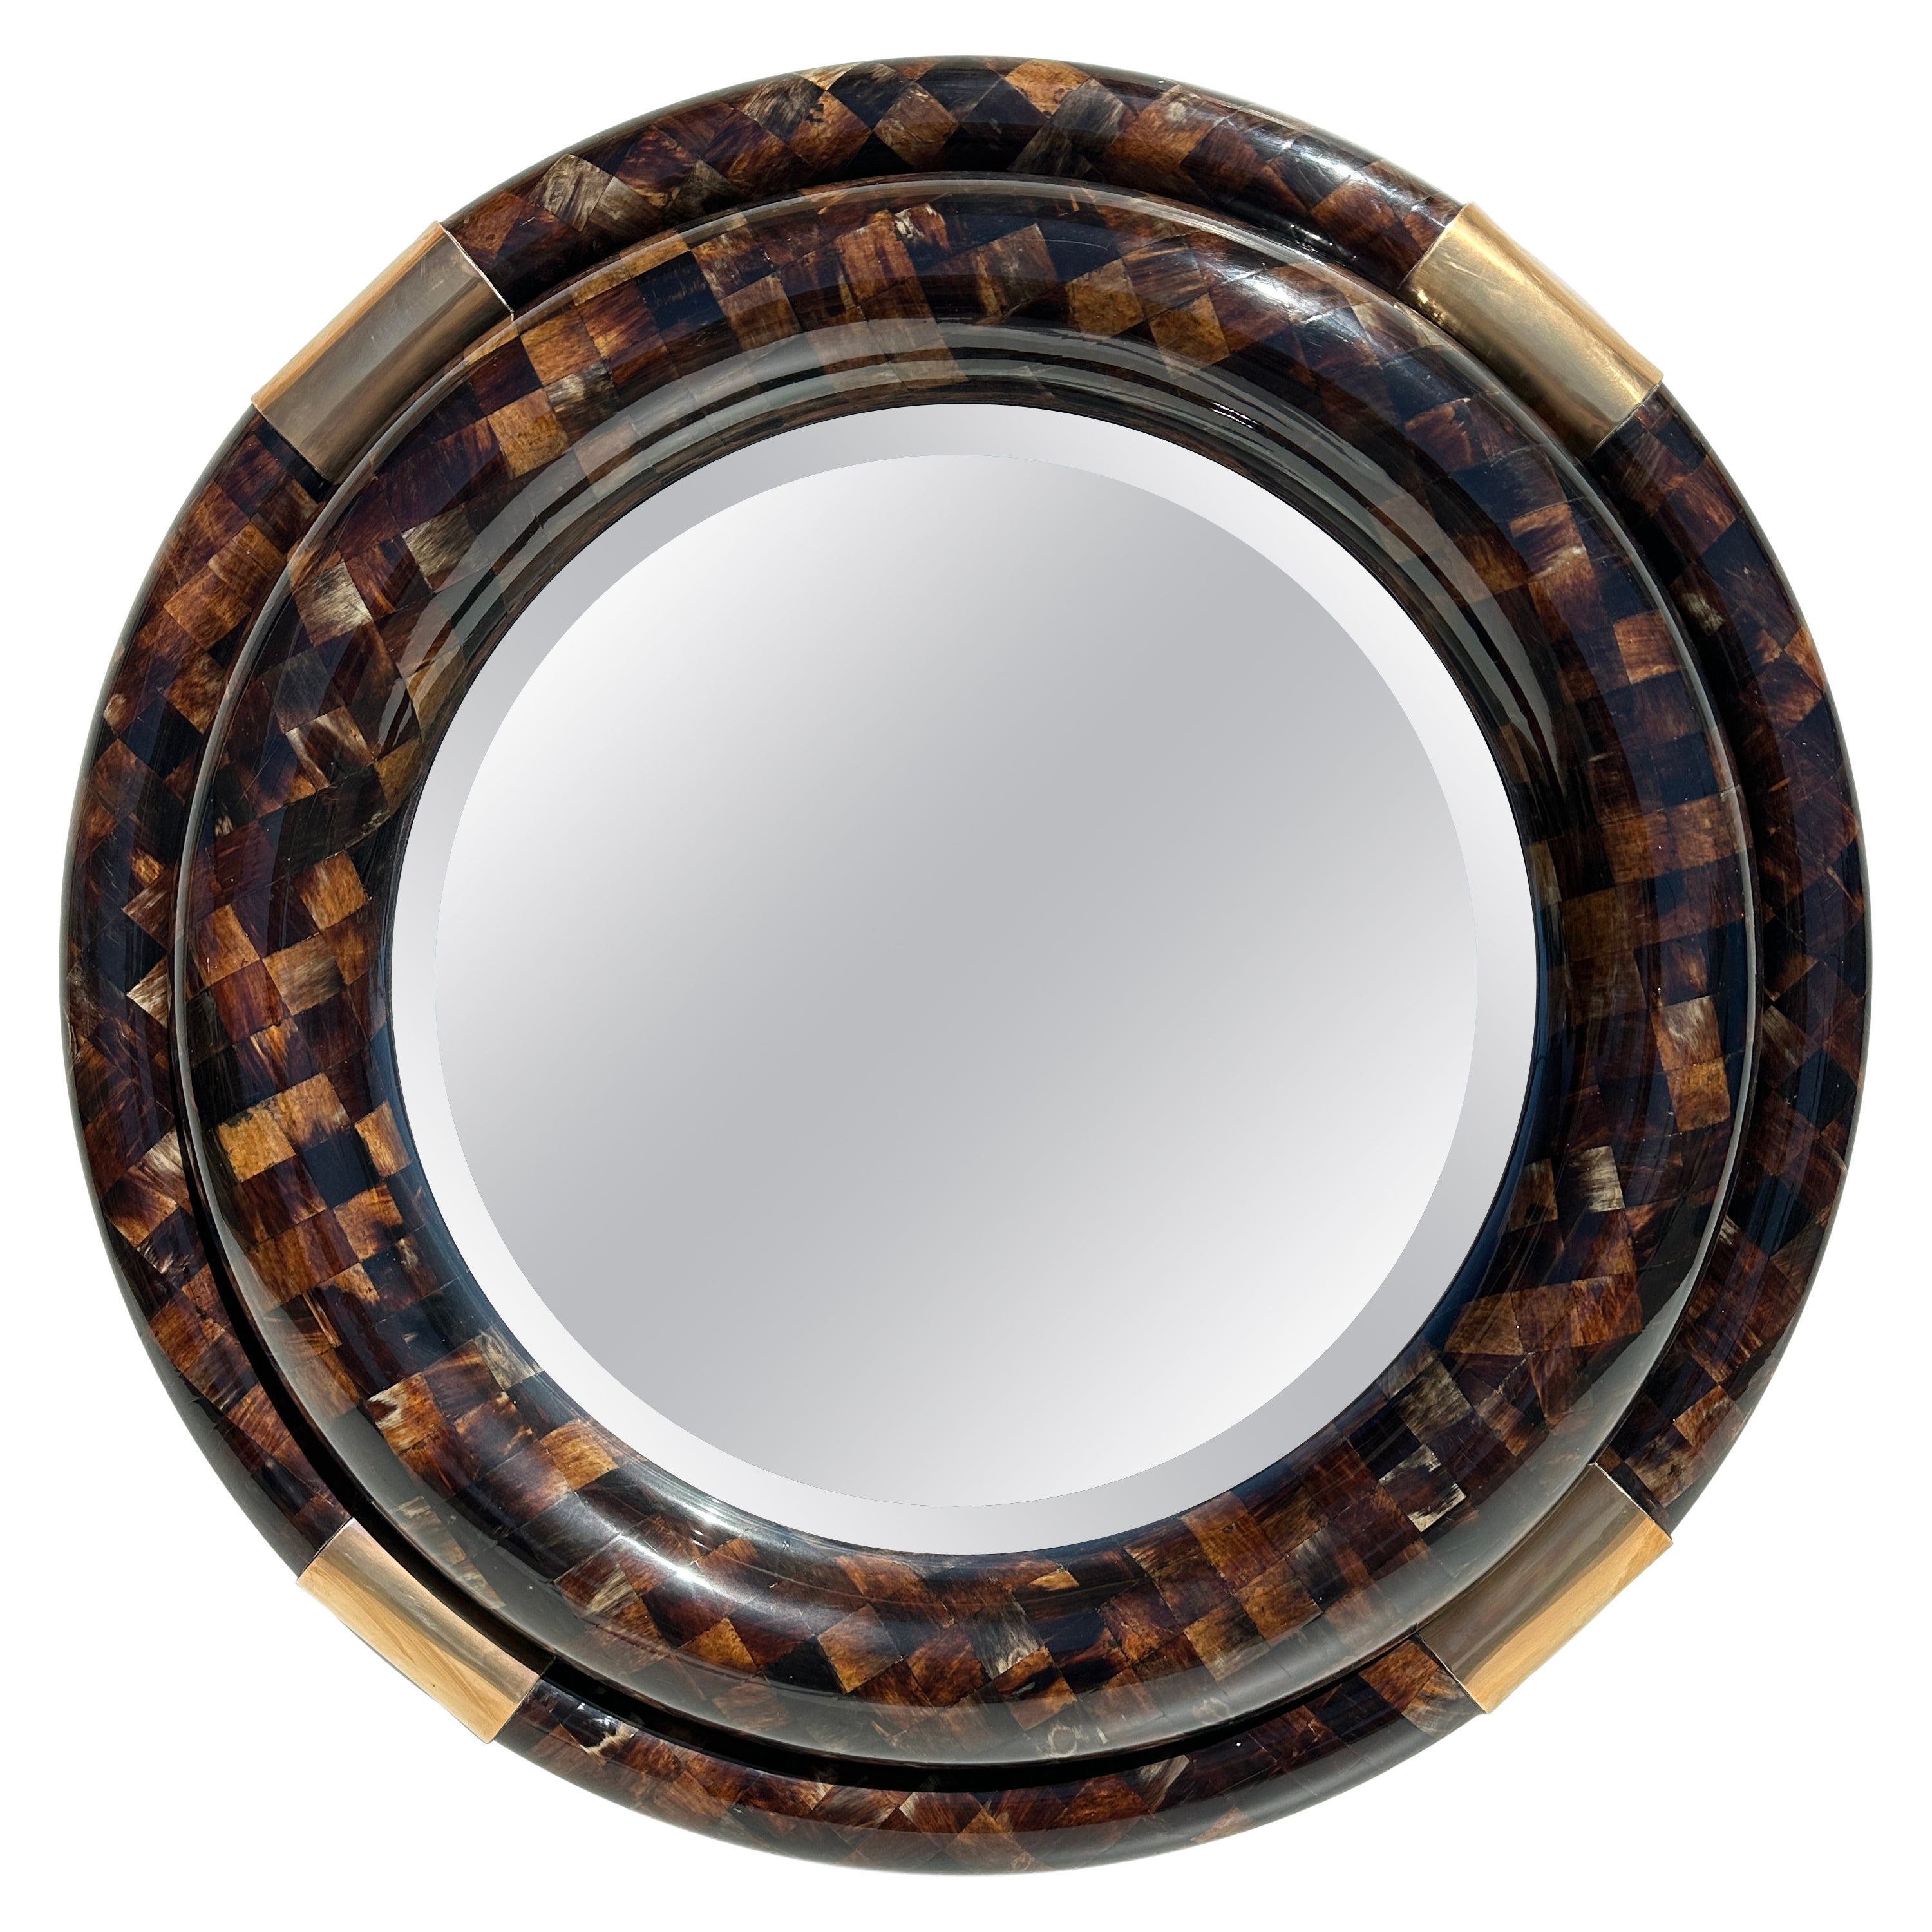 Tessellated Horn Round Bullnose Mirror